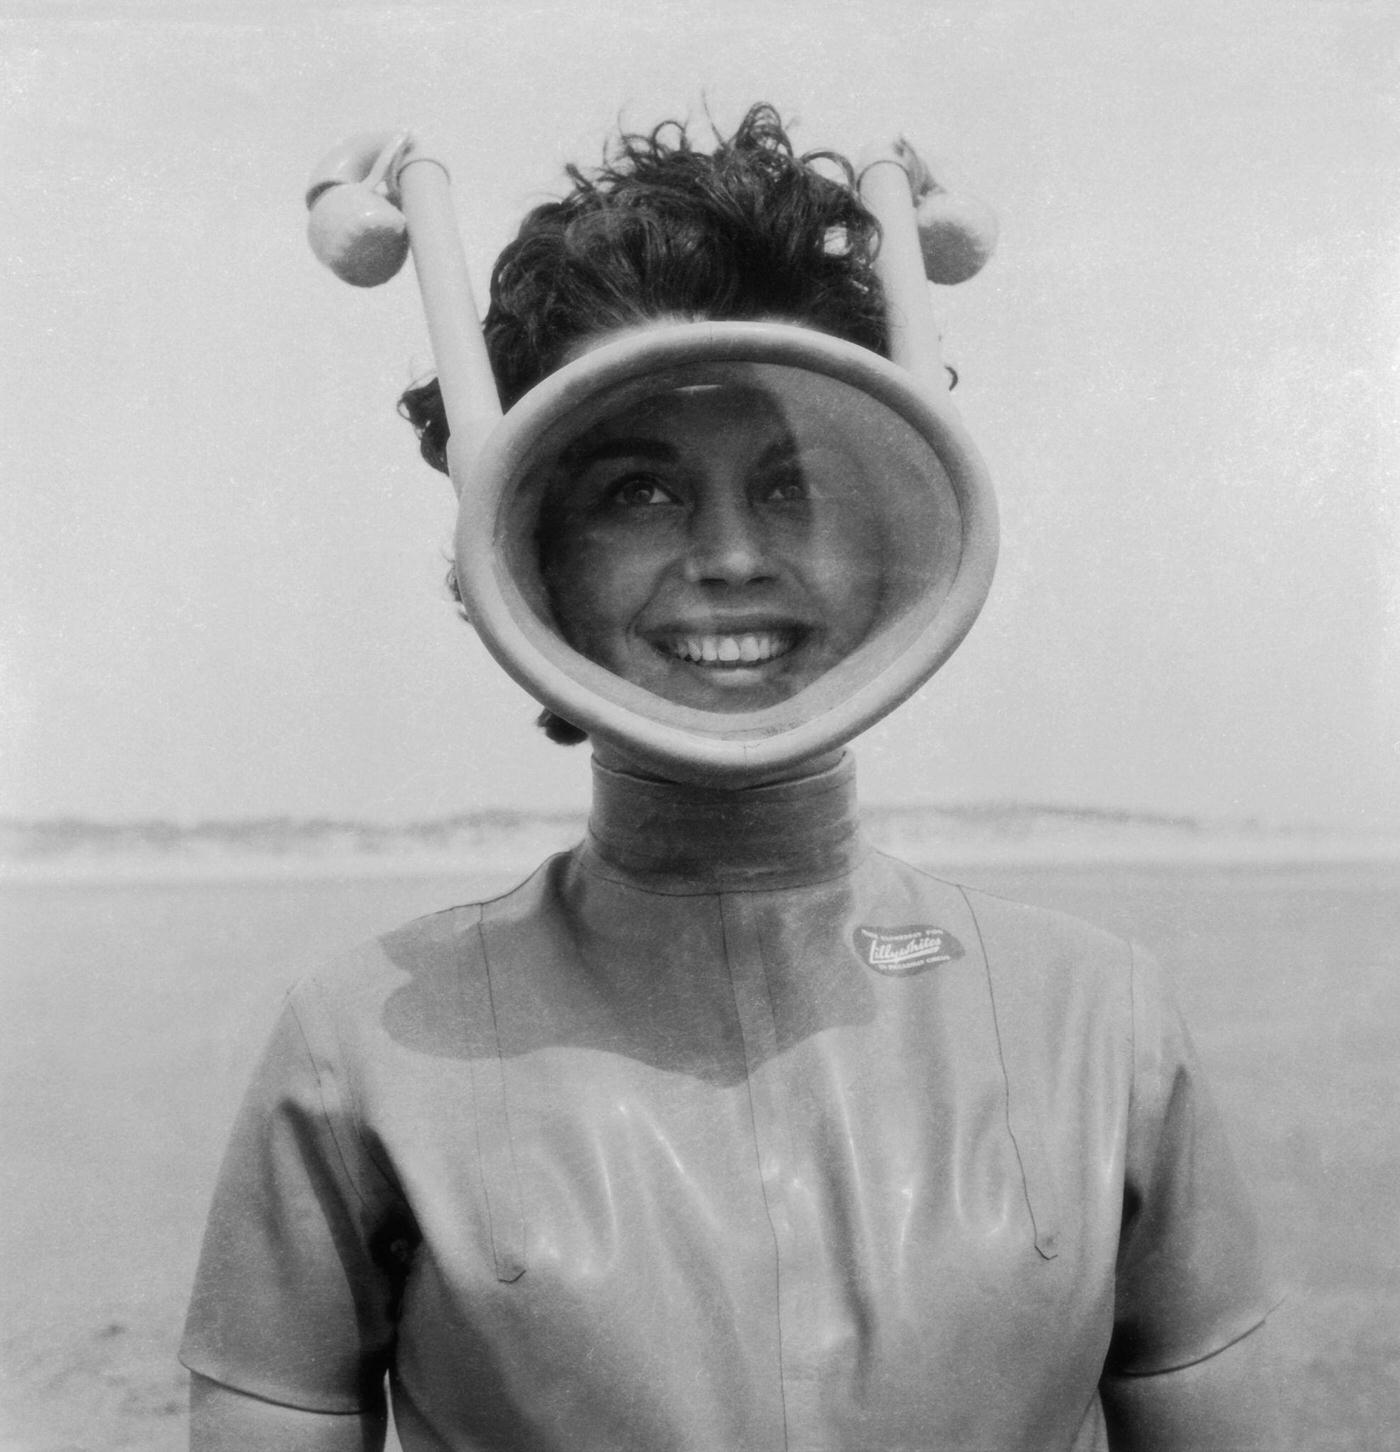 A woman equipped for a diving session with an unusual full face mask with integrated snorkels and water suit